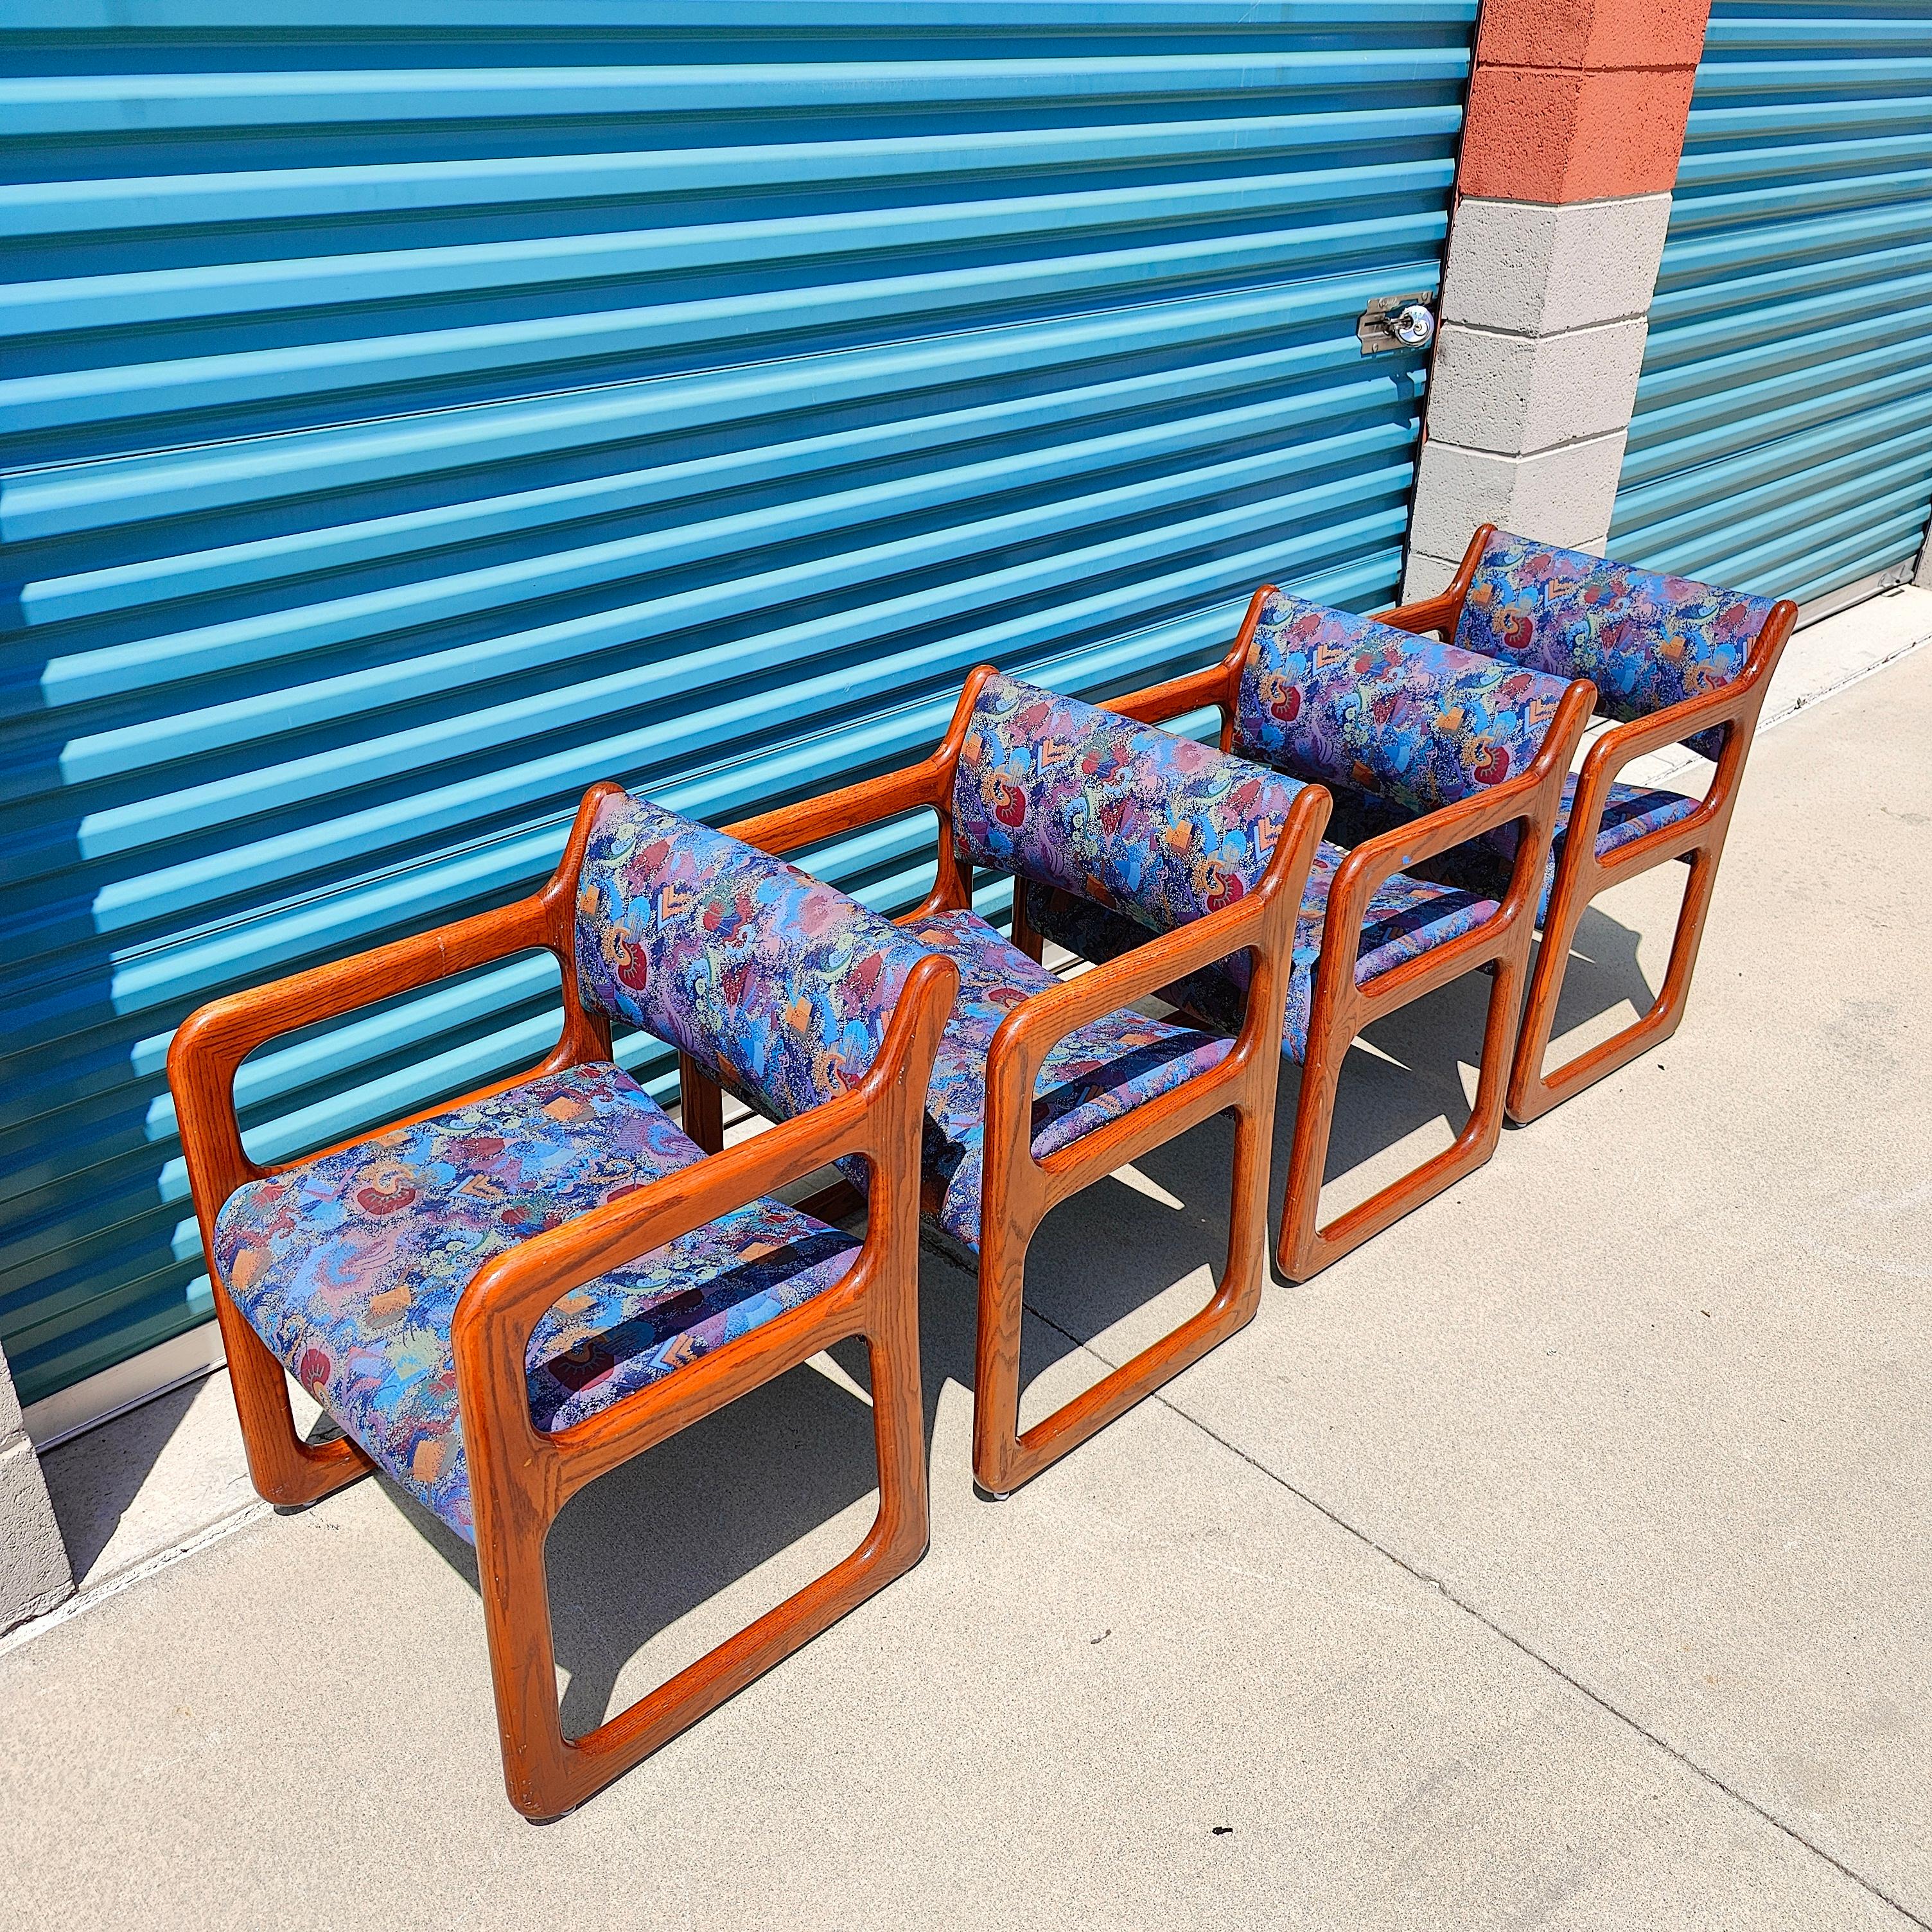 All very sturdy, in original condition with stylish fabric. They date back to the 90s. Oak frames with some wear throughout, however, no breaks. Real stunners in person. Each chair measures approximately 22W x 19D x 29.5H with an arm height of